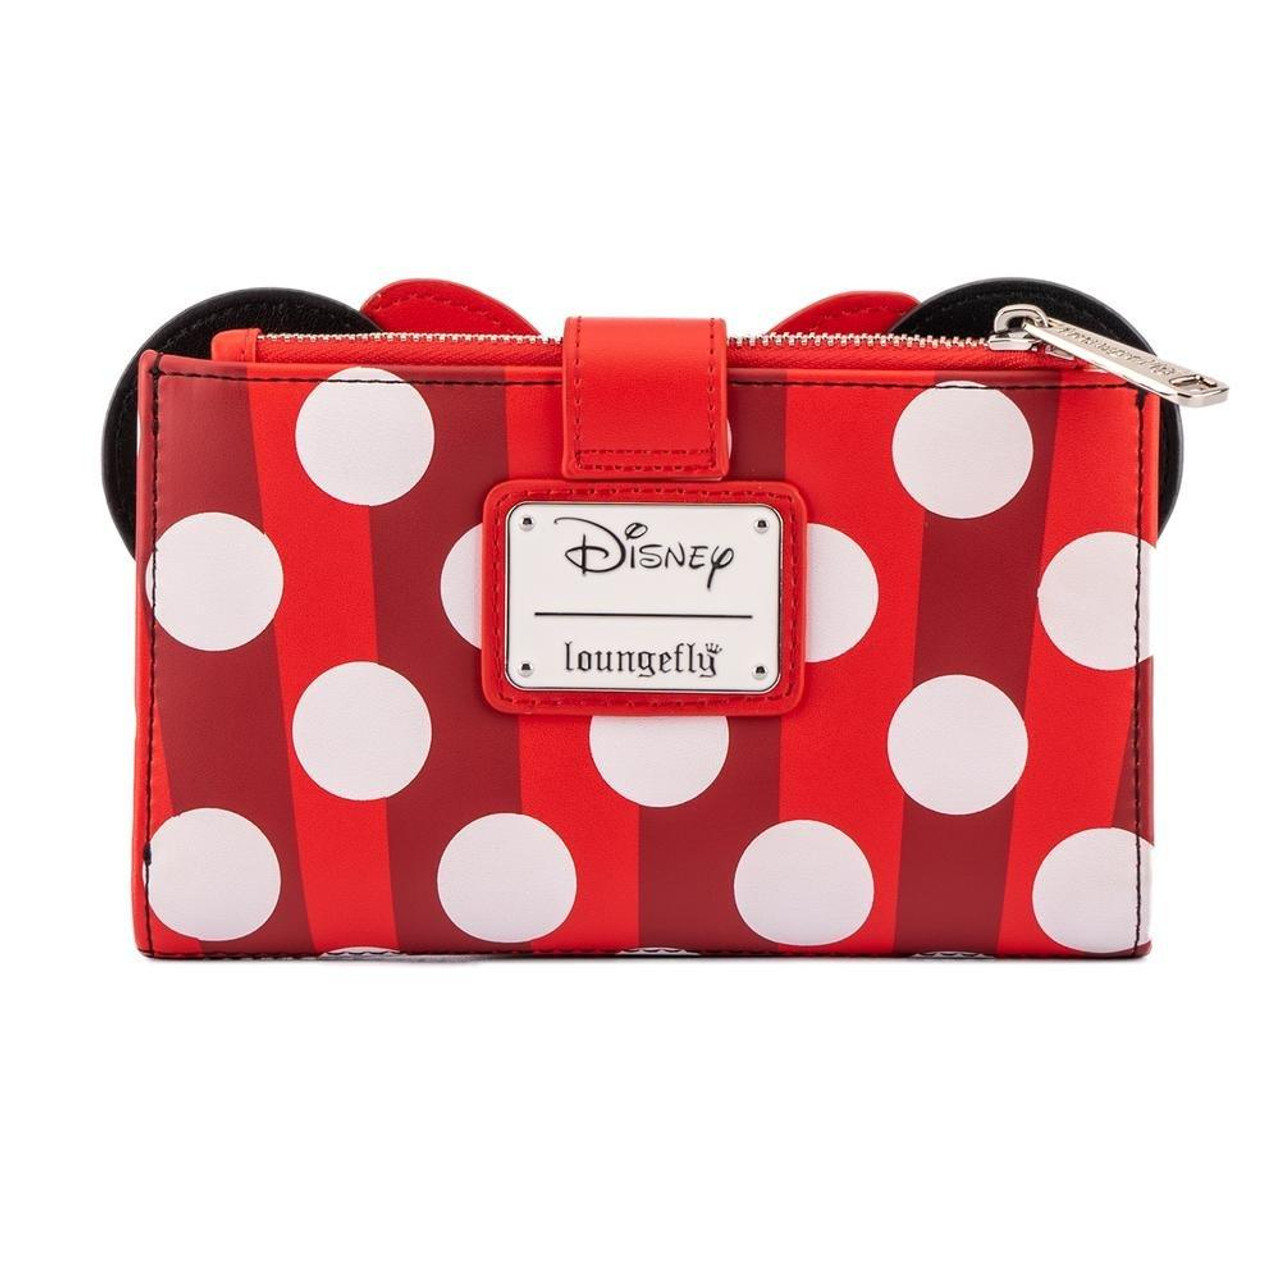 New Minnie Mouse Loungefly Wallet Now Available at World of Disney